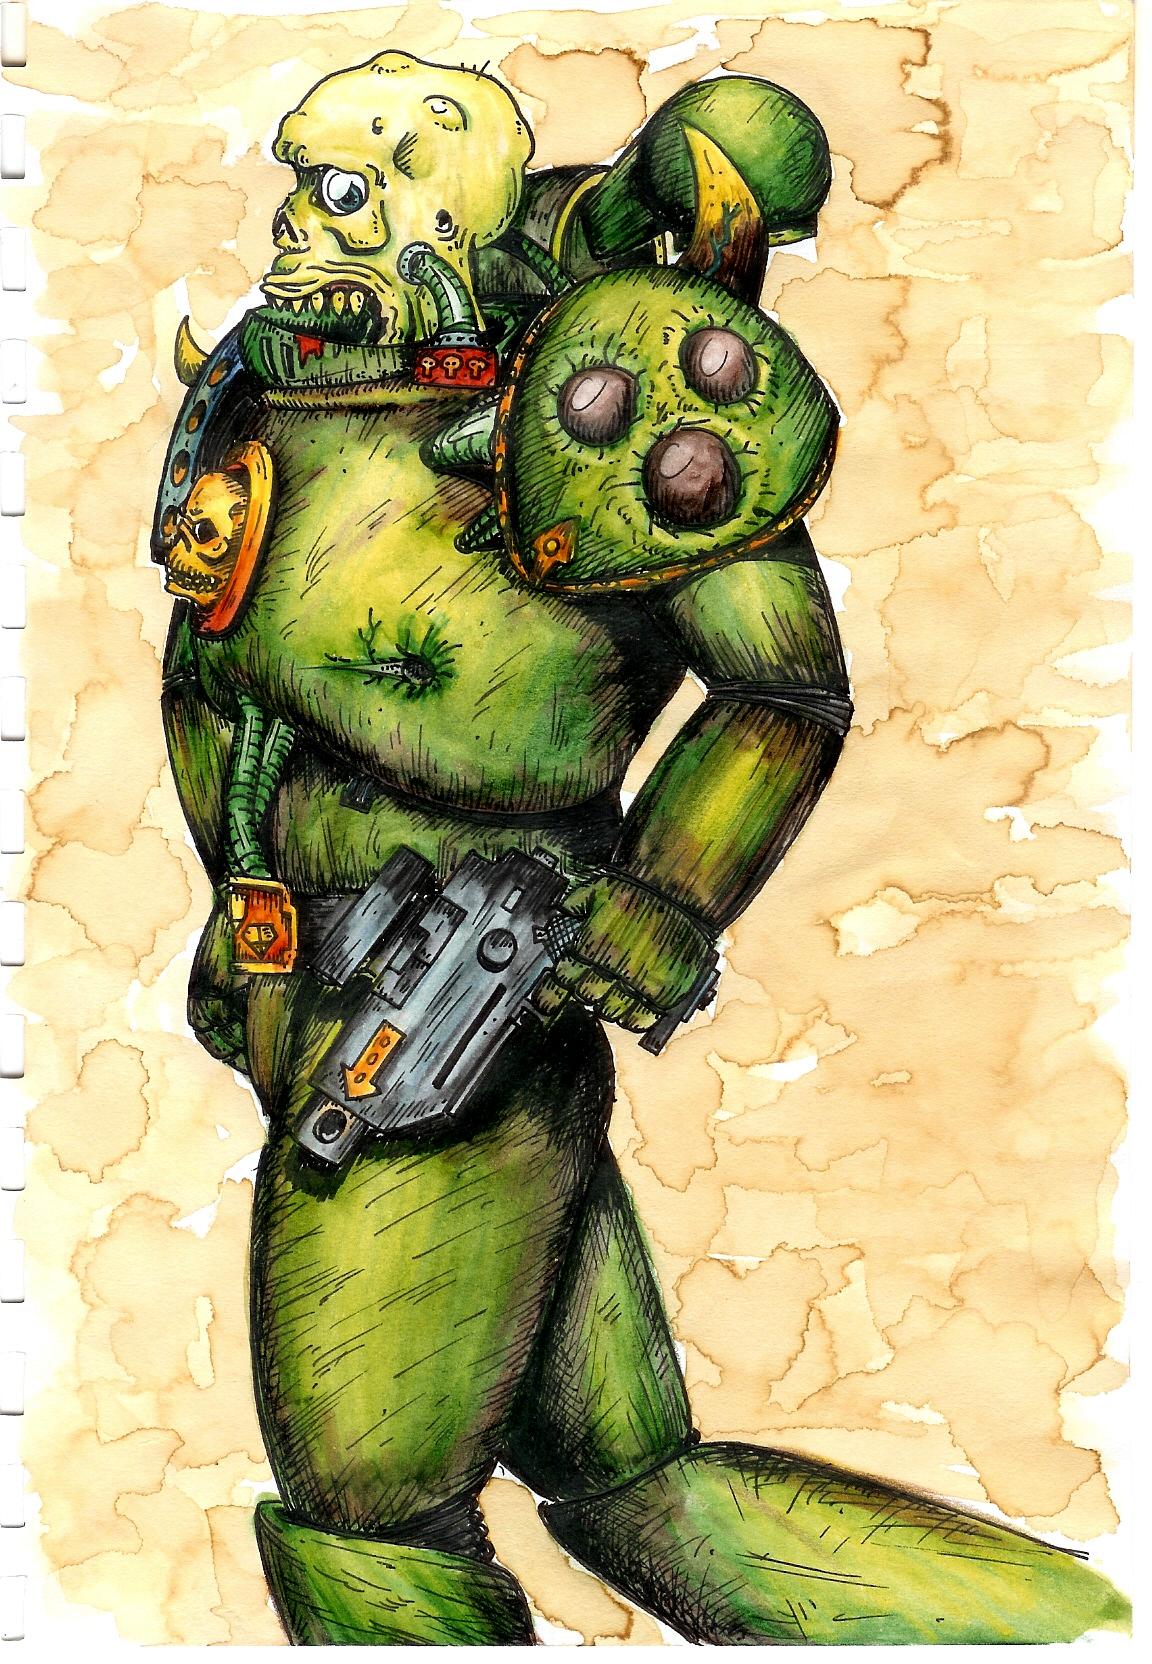 80´s, Artwork, Chaos, Chaos Space Marines, Conversion, Daemons, Drawing, Drawings, First Edition, Nurgle, Old, Old Style, Plague Marines, School, Scouts, Space Marines, Style